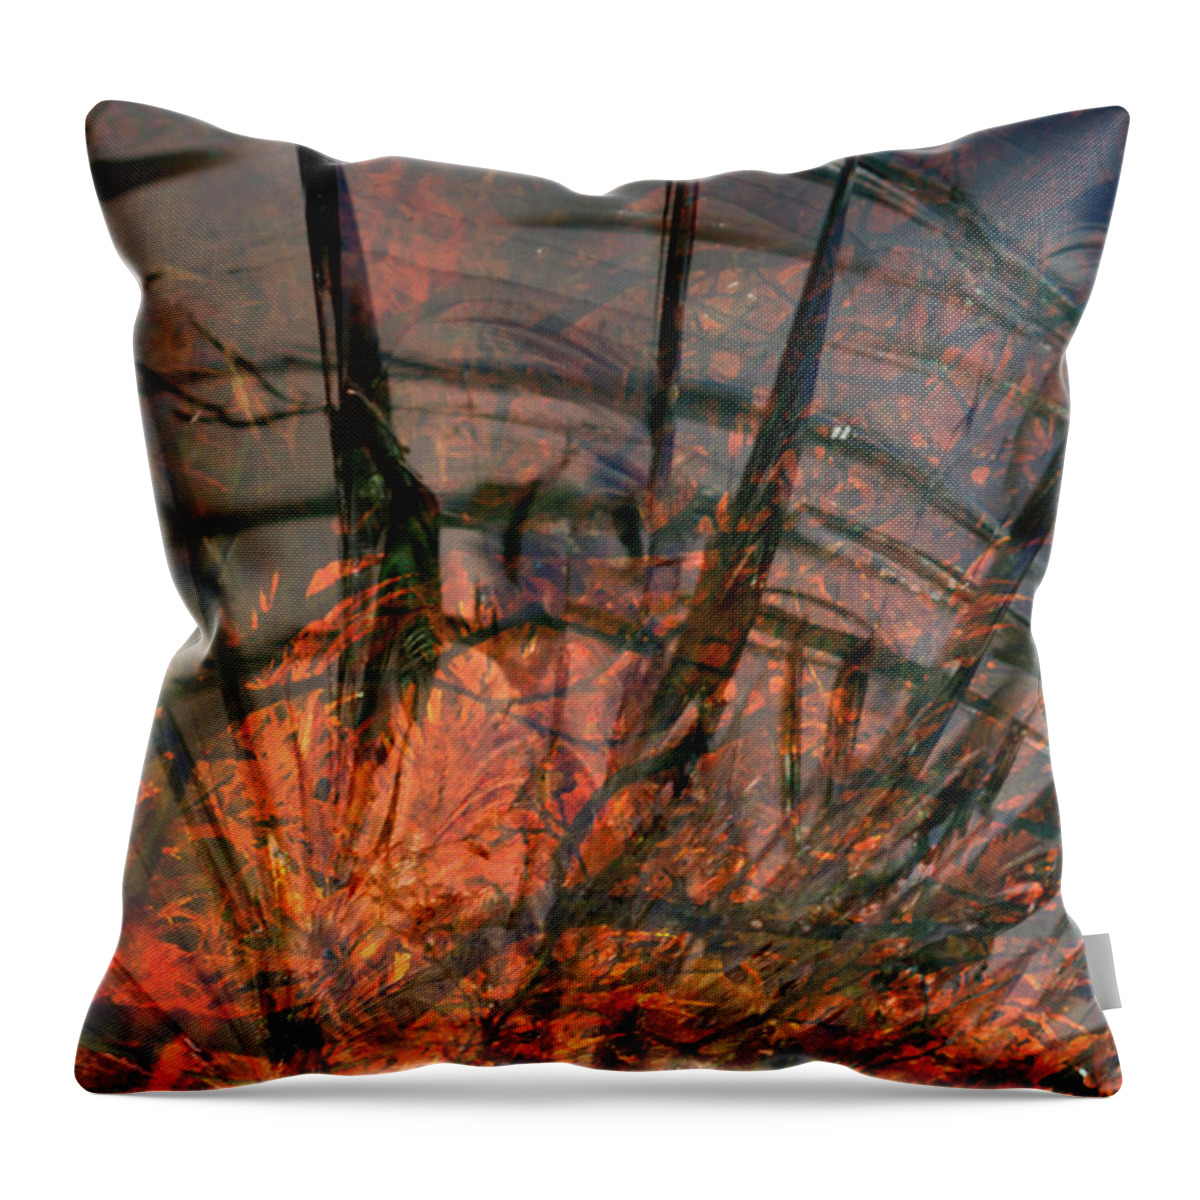 Water Throw Pillow featuring the digital art Rising Sun by Richard Andrews